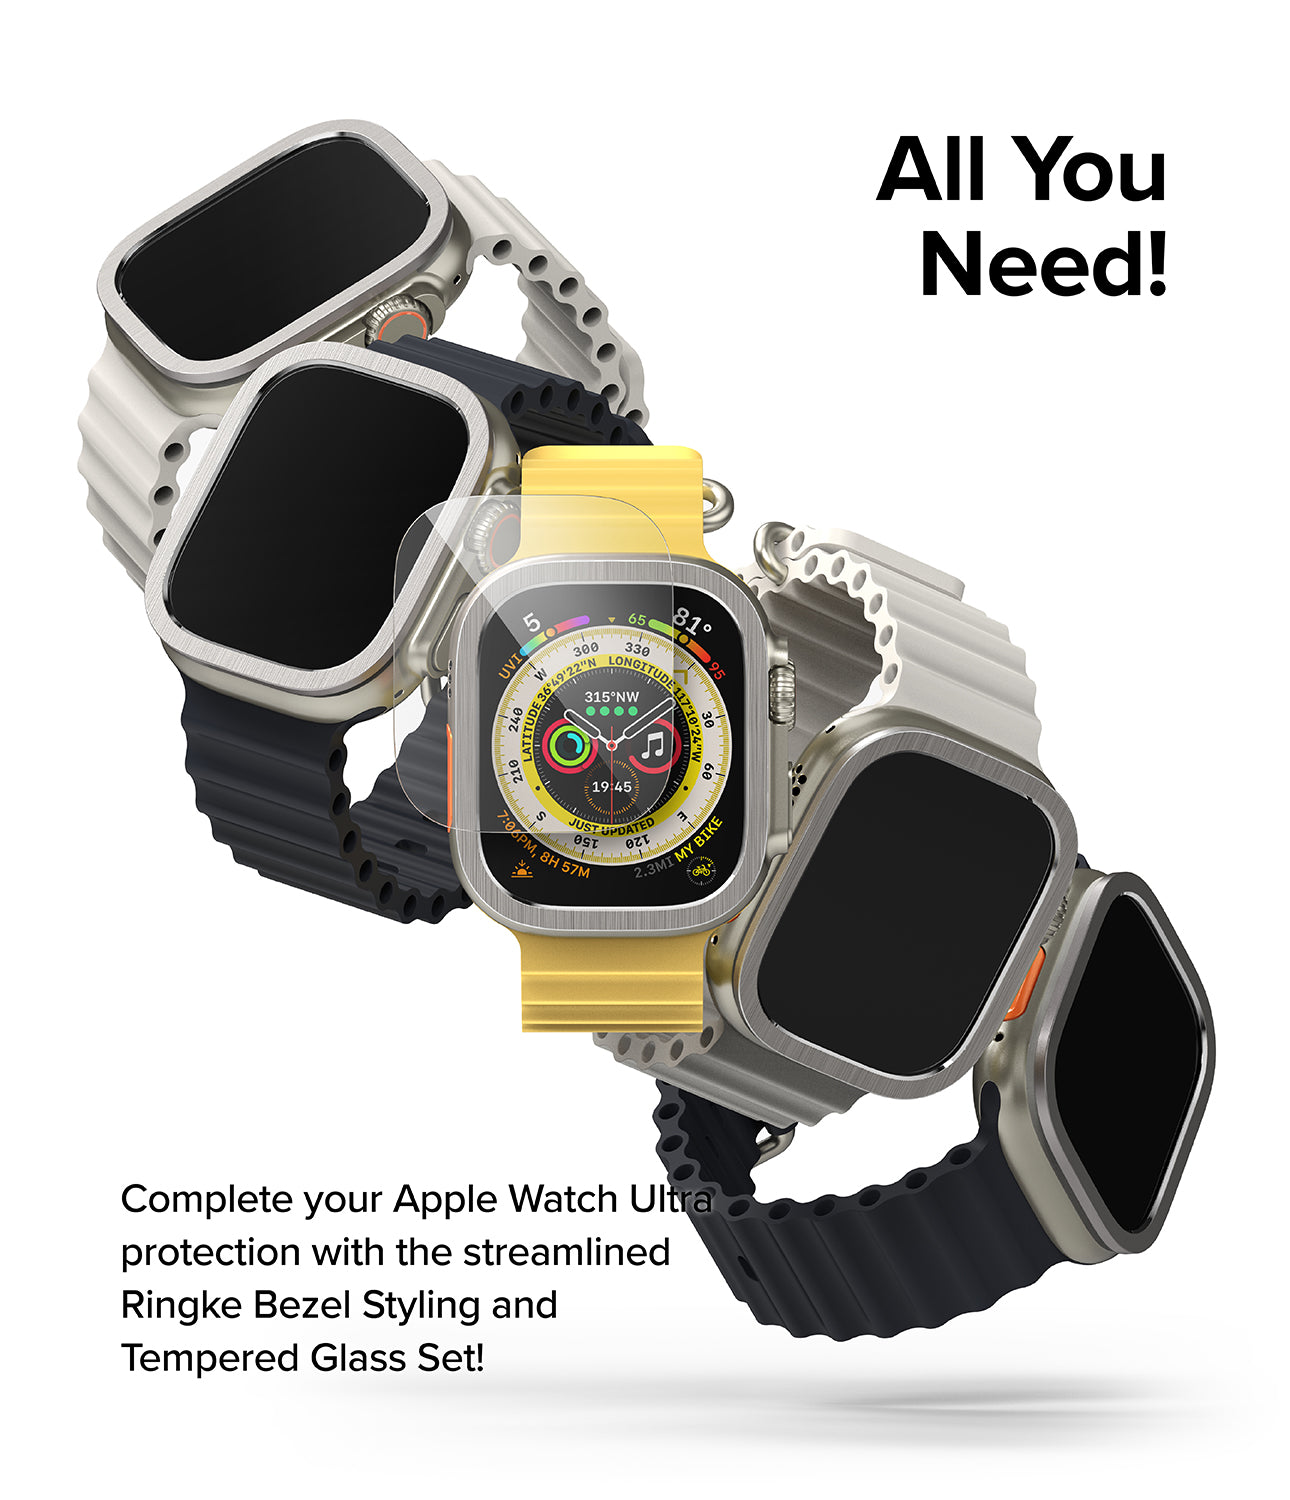 All You Need! Complete your Apple Watch Ultra protection with the streamlined Ringke Bezel Styling and Tempered Glass set! 